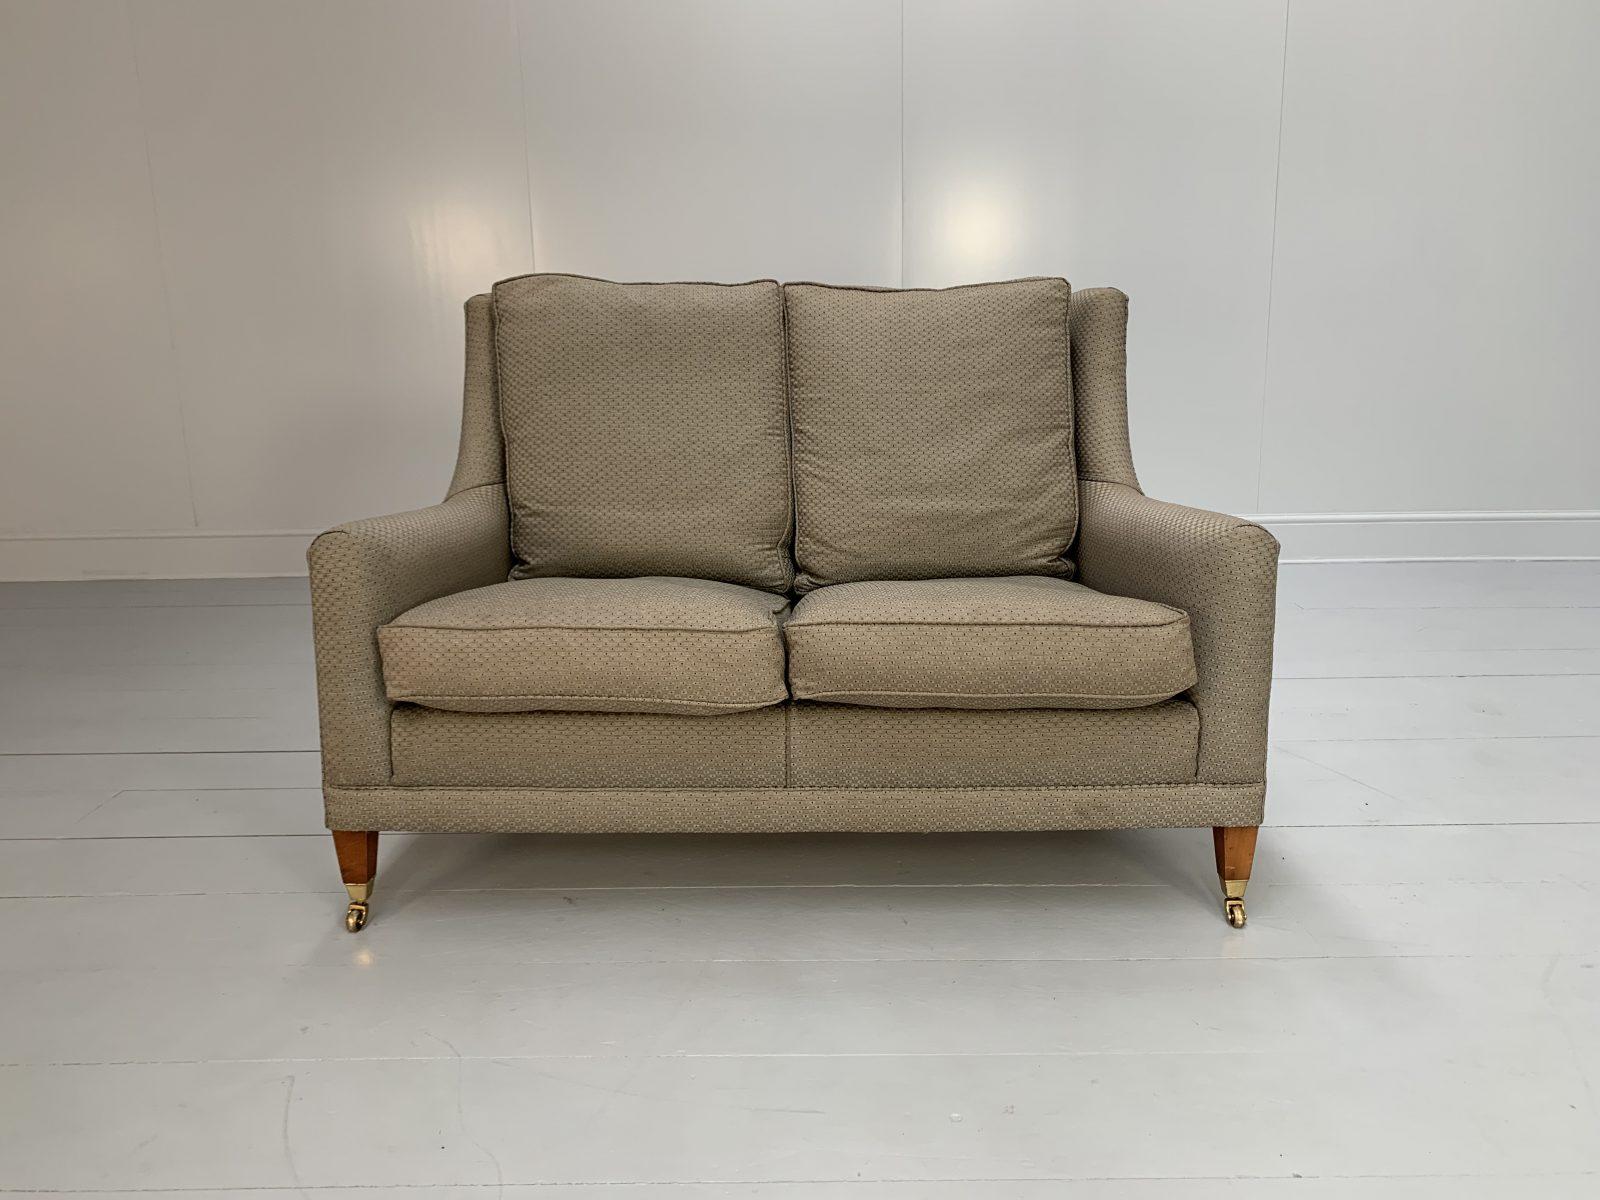 Hello Friends, and welcome to another unmissable offering from Lord Browns Furniture, the UK’s premier resource for fine Sofas and Chairs.

On offer on this occasion is a superb, majestic Duresta “Emma” Cushion-Back 2-Seat Sofa, dressed in a